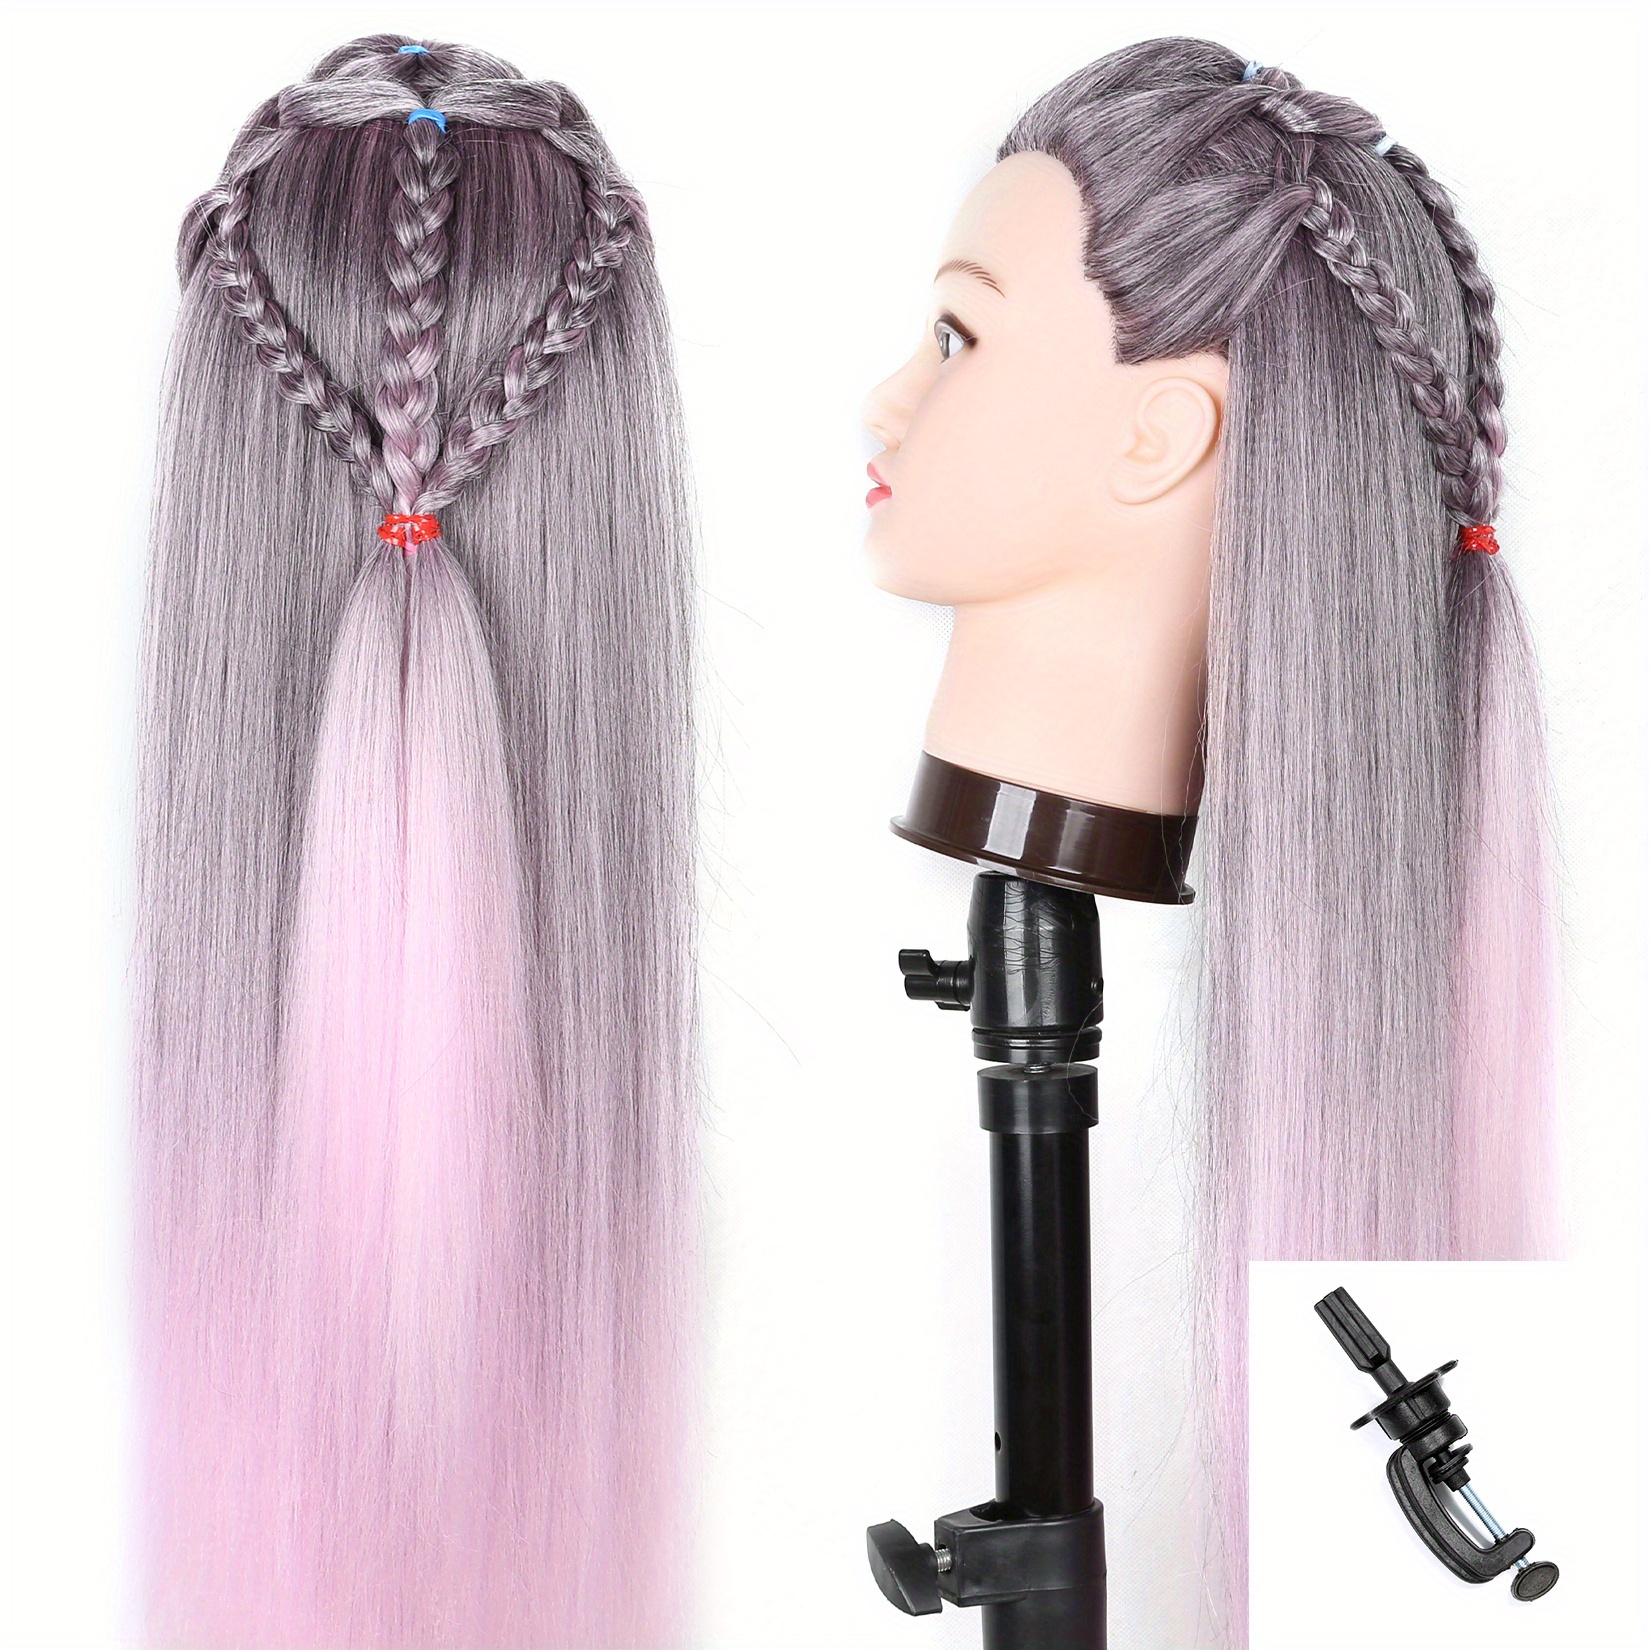 Perfehair DDoll: Professional Cosmetology Mannequin Head